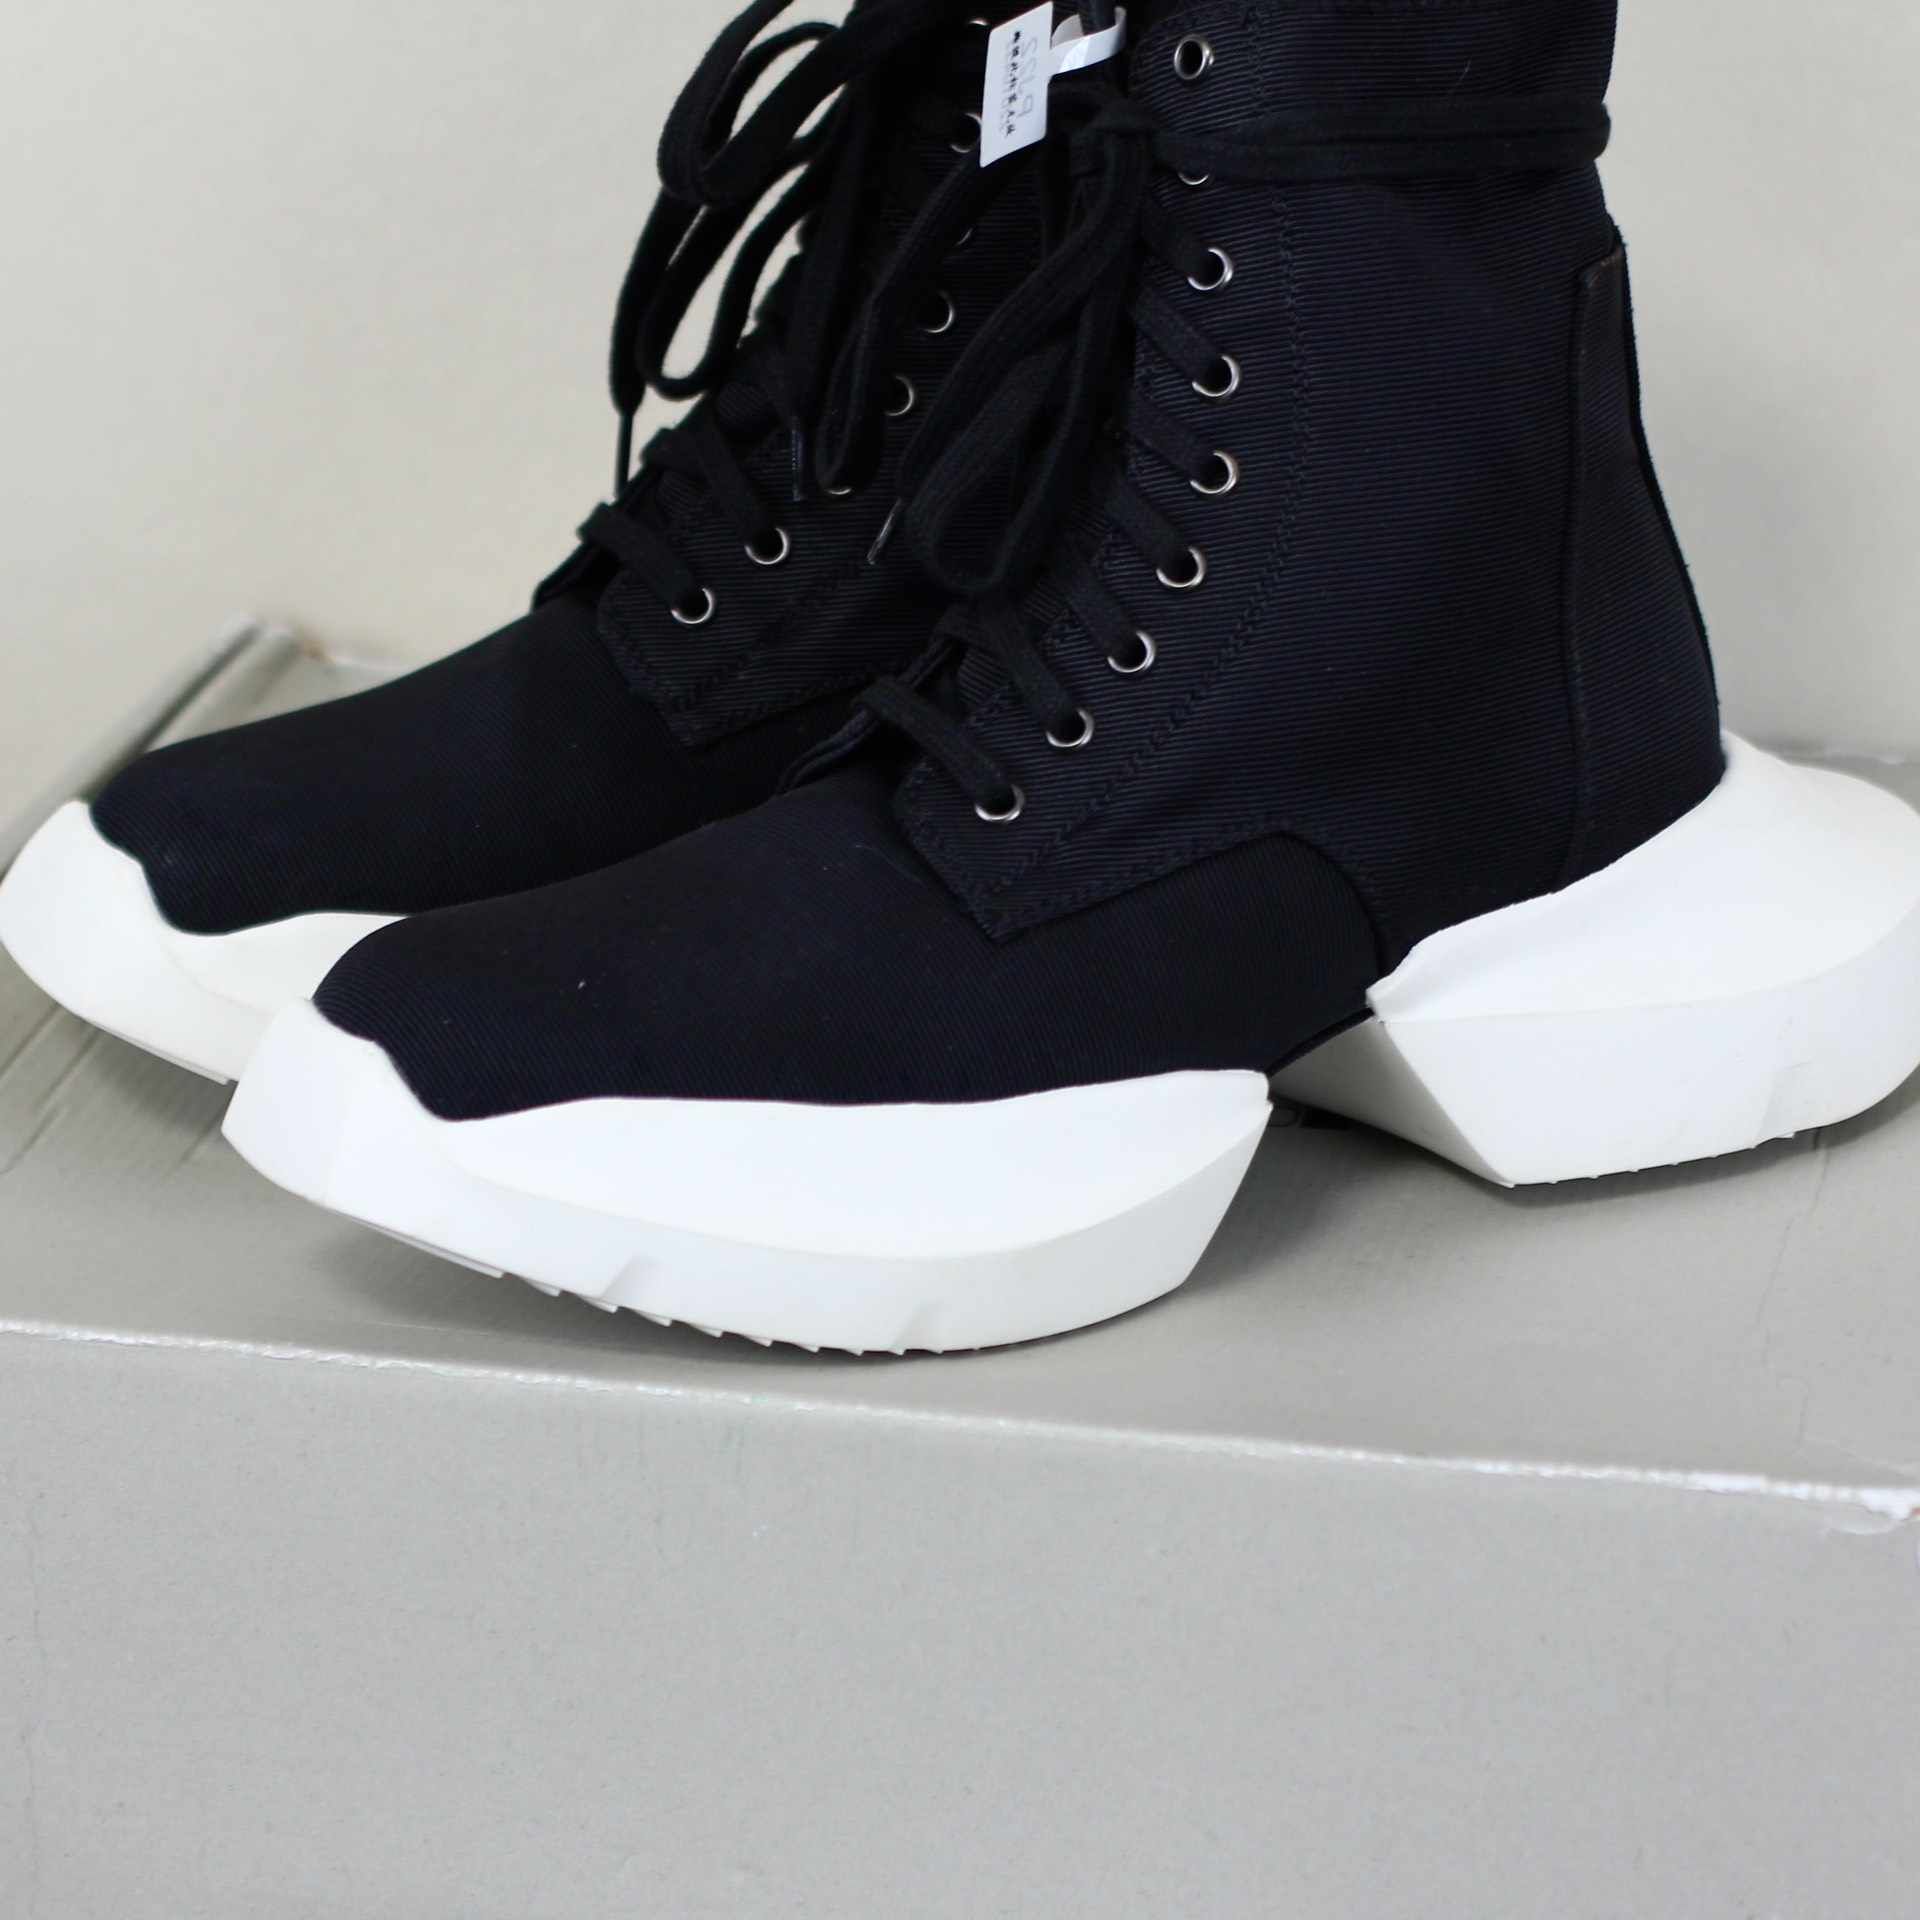 Rick Owens Drkshdw Army Split Black And Milk Ankle Boots - 3